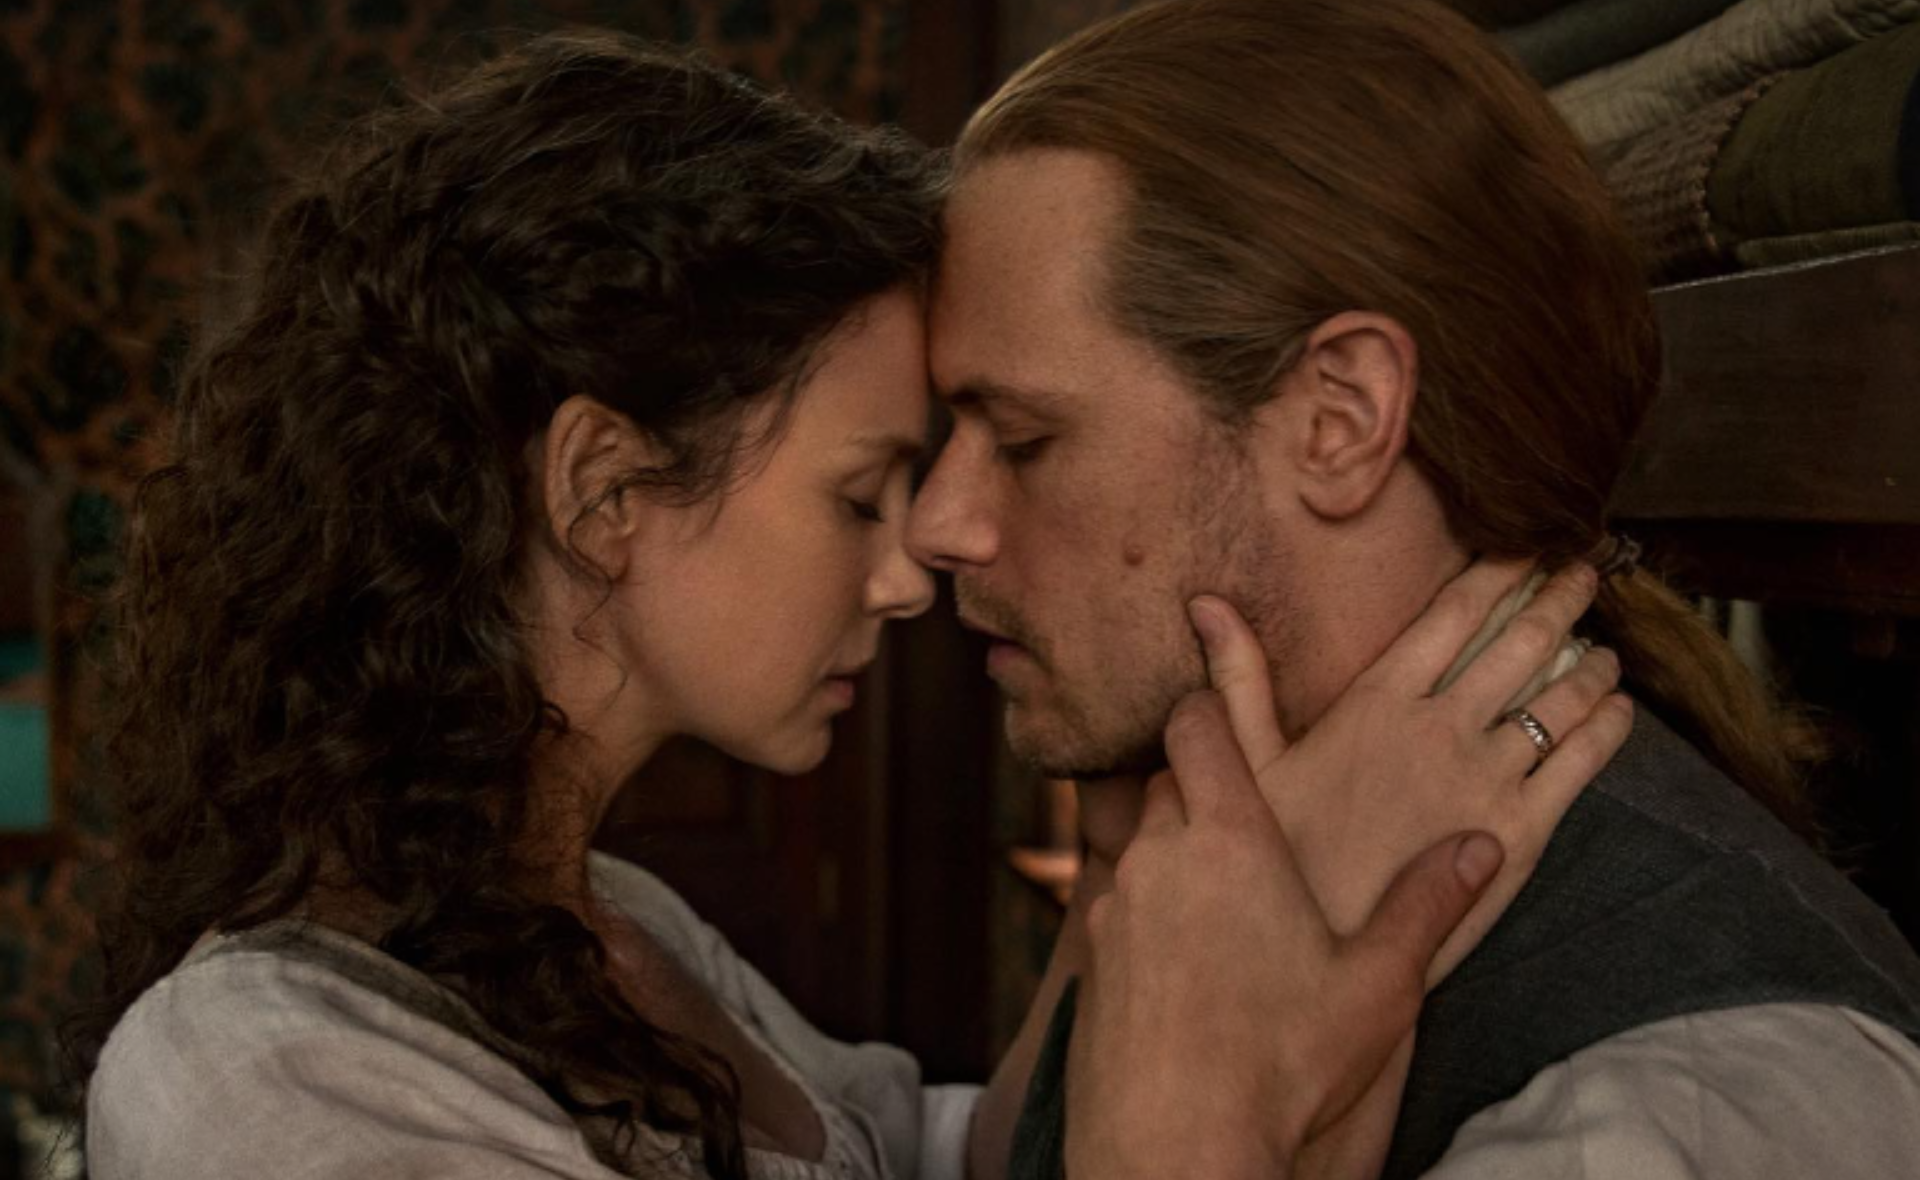 Missing the epic Jamie and Claire love story? These are the best shows to cure your Outlander thirst